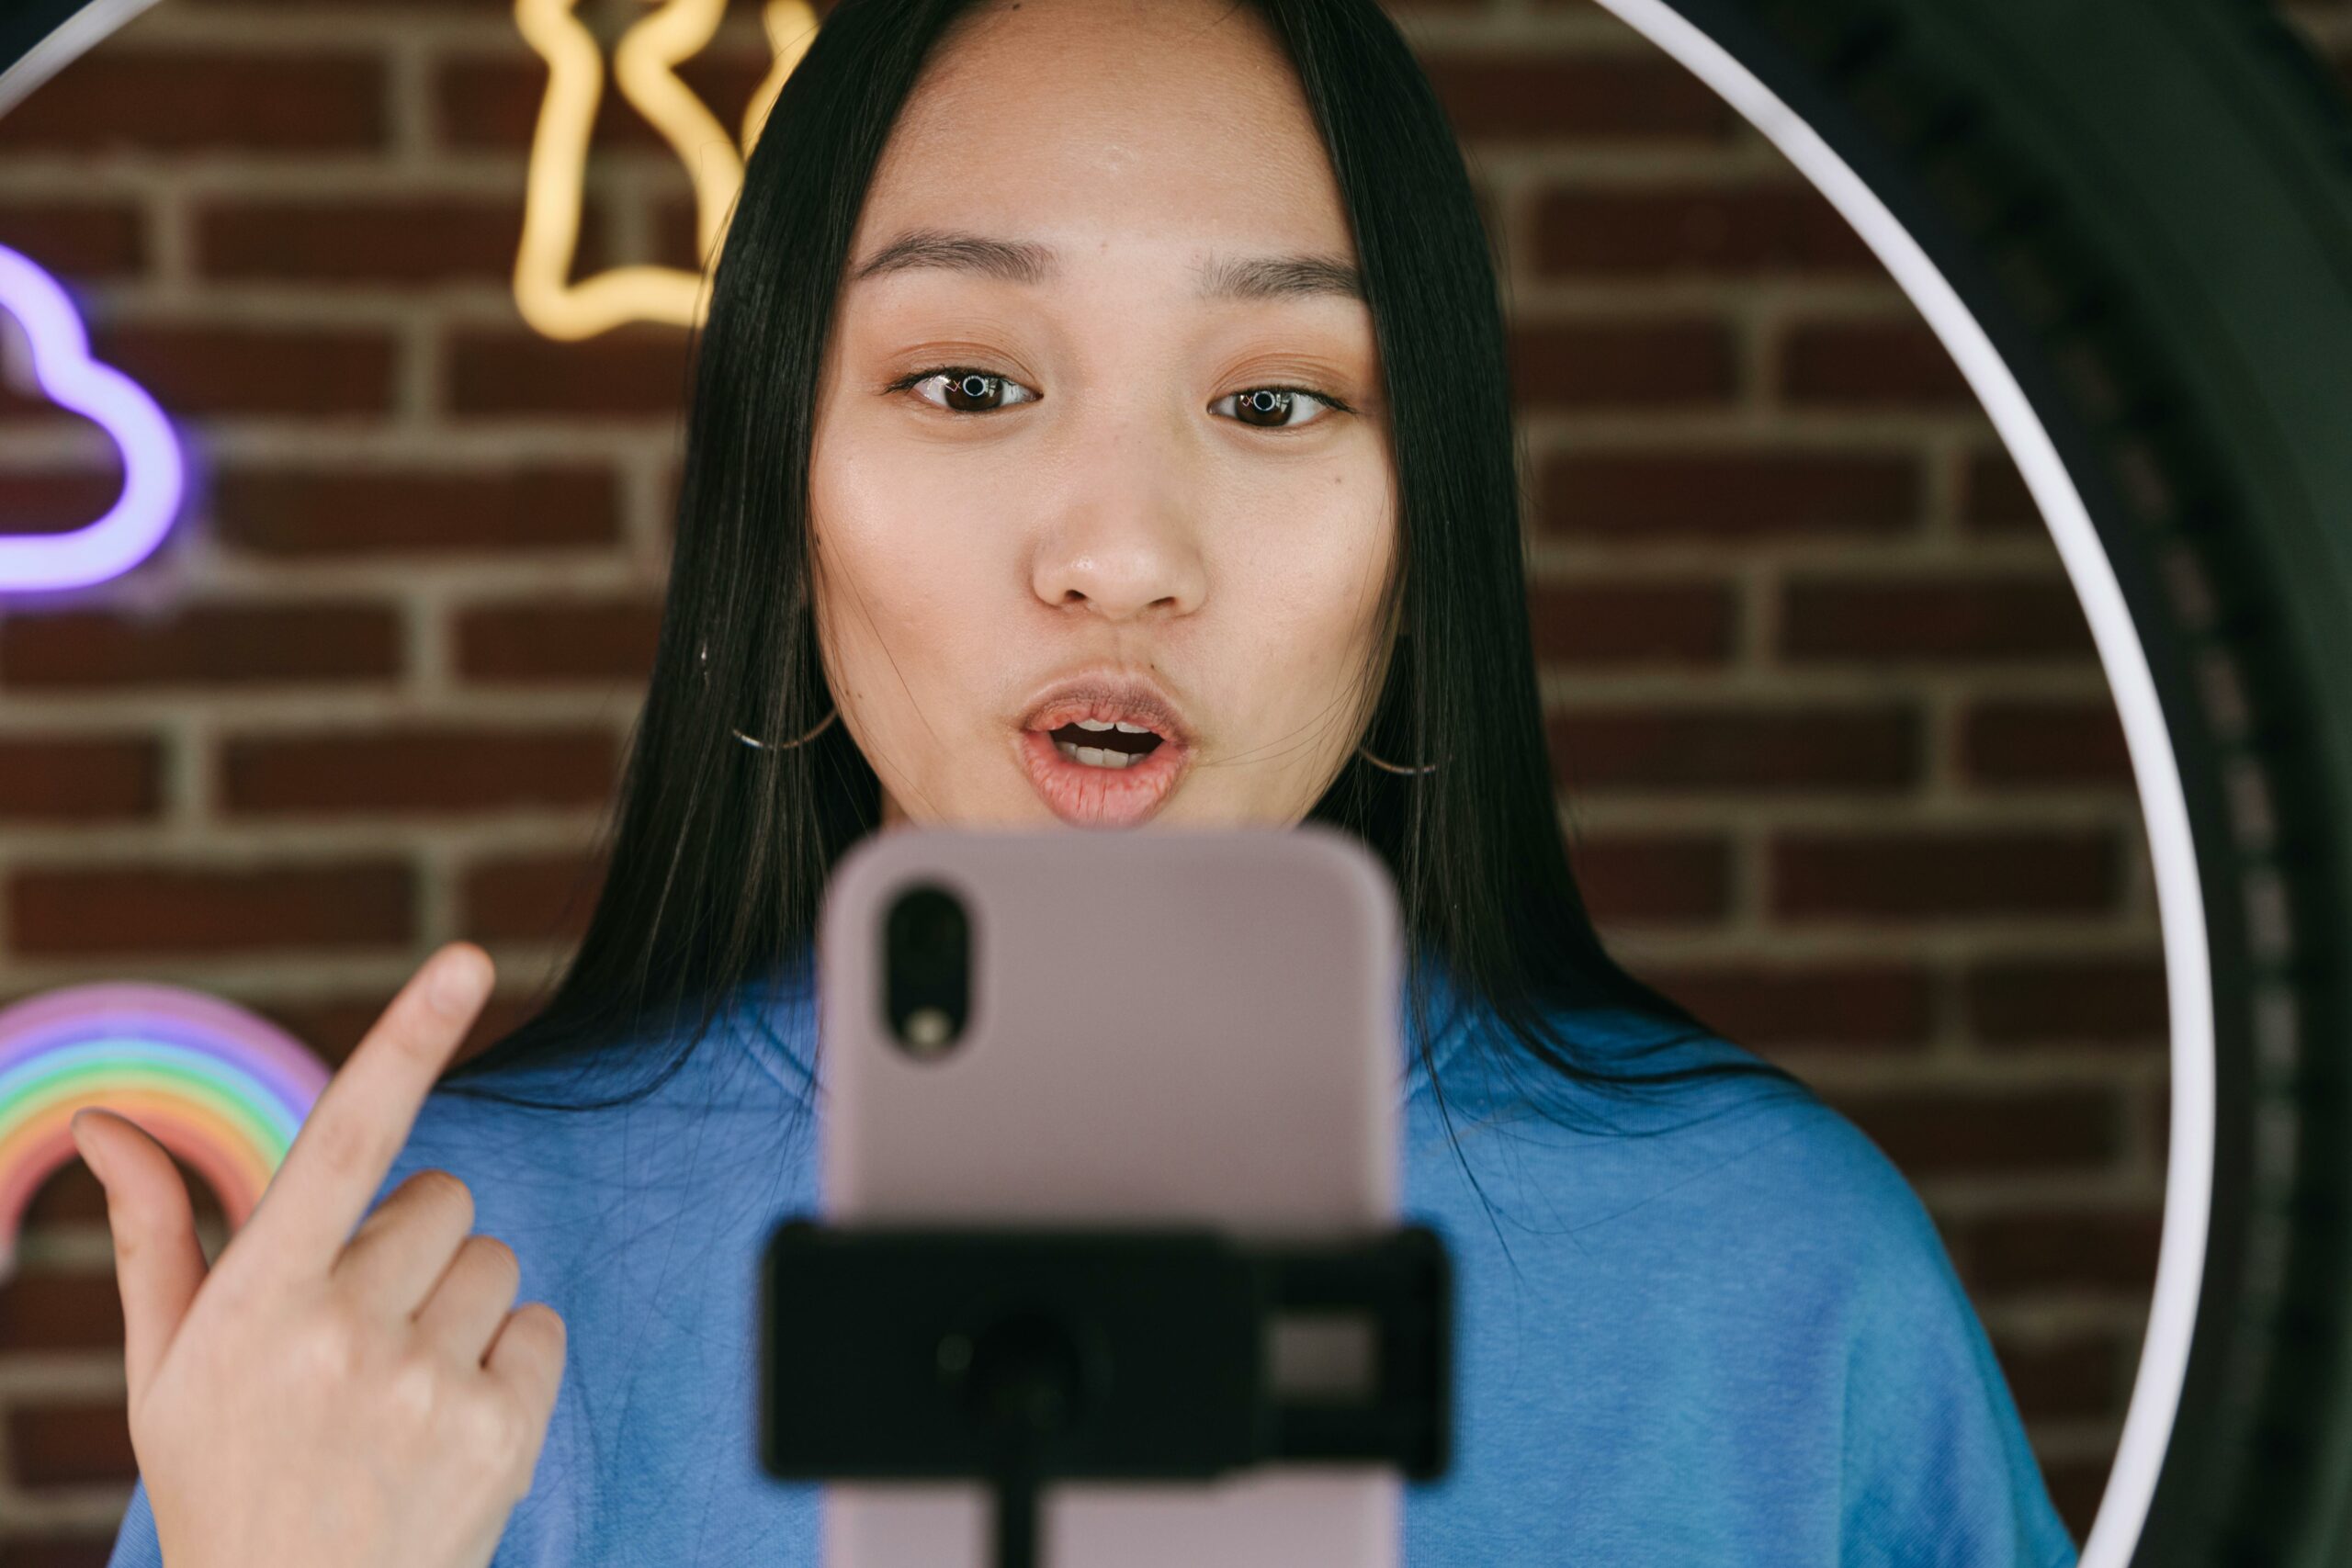 An influencer woman stands in front of a ring light with a phone in front of her recording